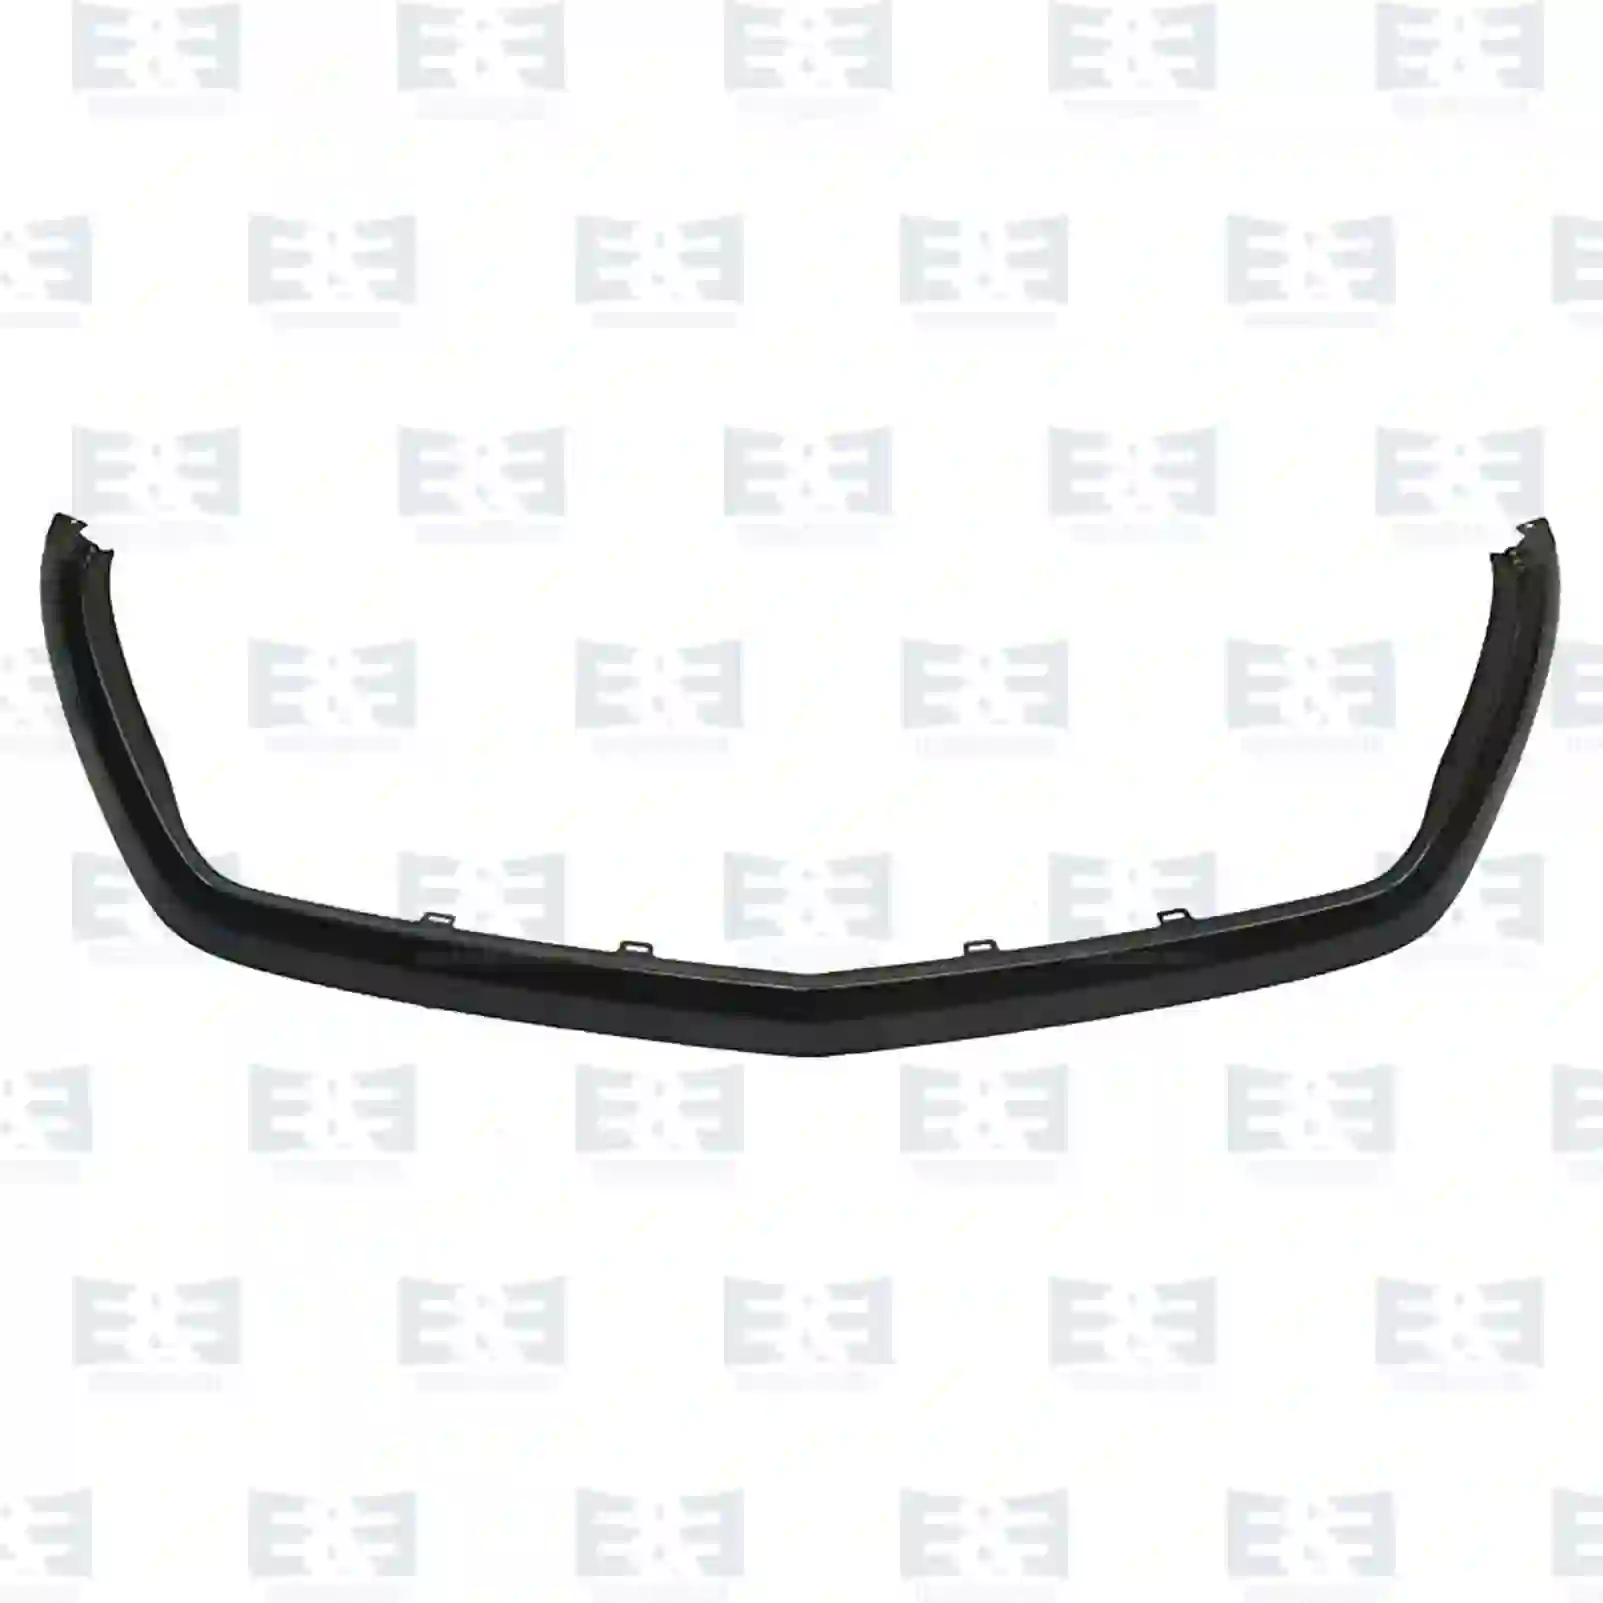  Frame, front grill || E&E Truck Spare Parts | Truck Spare Parts, Auotomotive Spare Parts